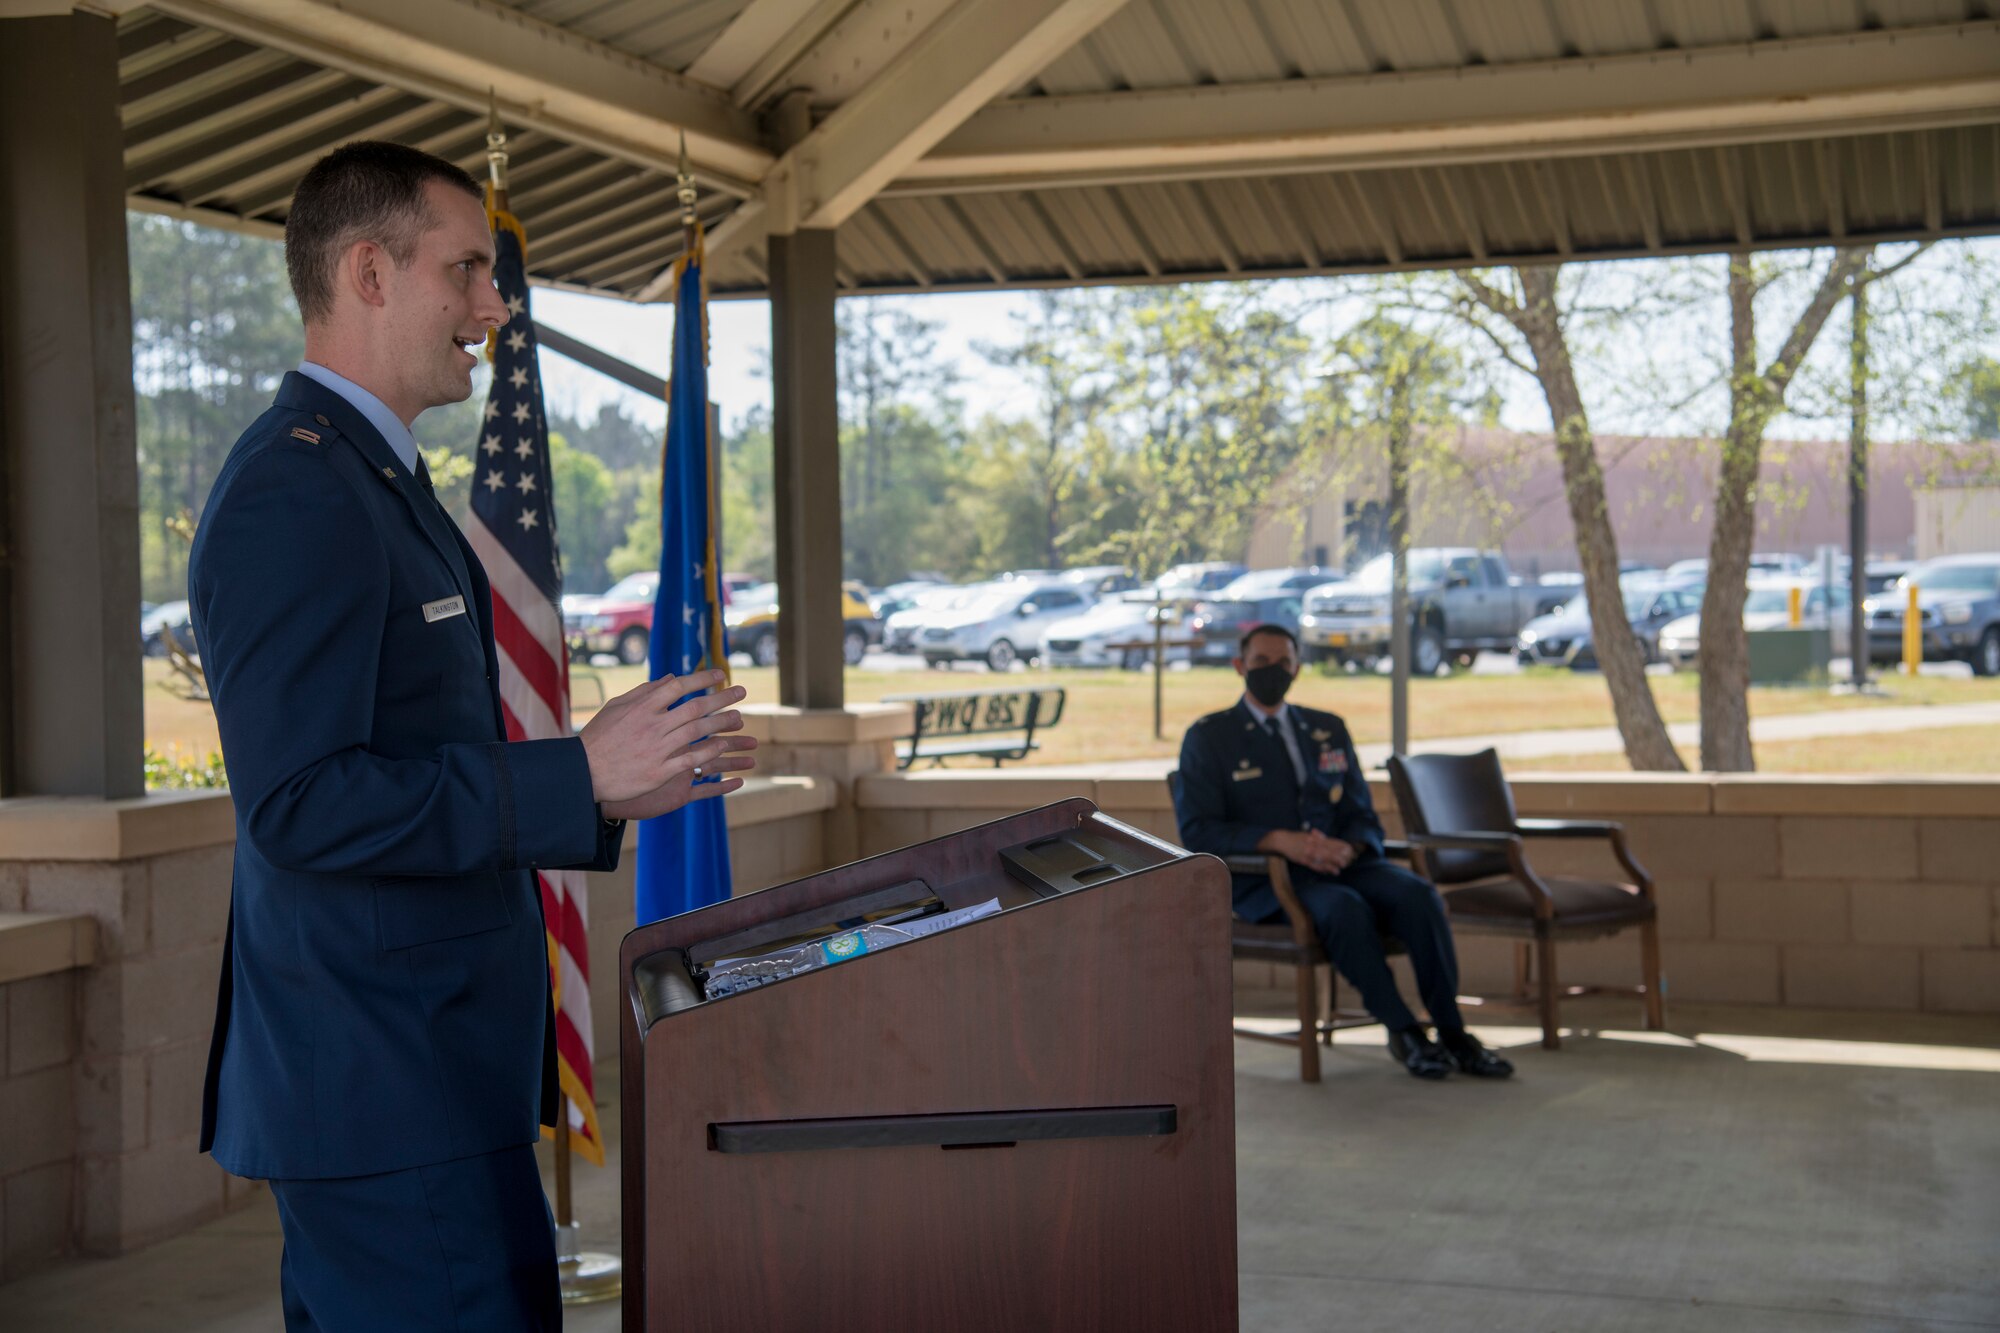 Capt. Grant J. Talkington, 5th Operational Weather Flight commander at Shaw Air Force Base, S.C., adresses his flight as Col. Stuart M. Rubio, 403rd operations group commander at Keesler Air Force Base, Miss., looks on during an assumption of command ceremony at the 28th Operational Weather Squadron at Shaw Air Force Base, S.C. April 9, 2021. The 5th OWF conists of 24 military and civilian personnel providing weather support to four different major commands.(U.S. Air Force photo by Staff Sgt. Kristen Pittman)